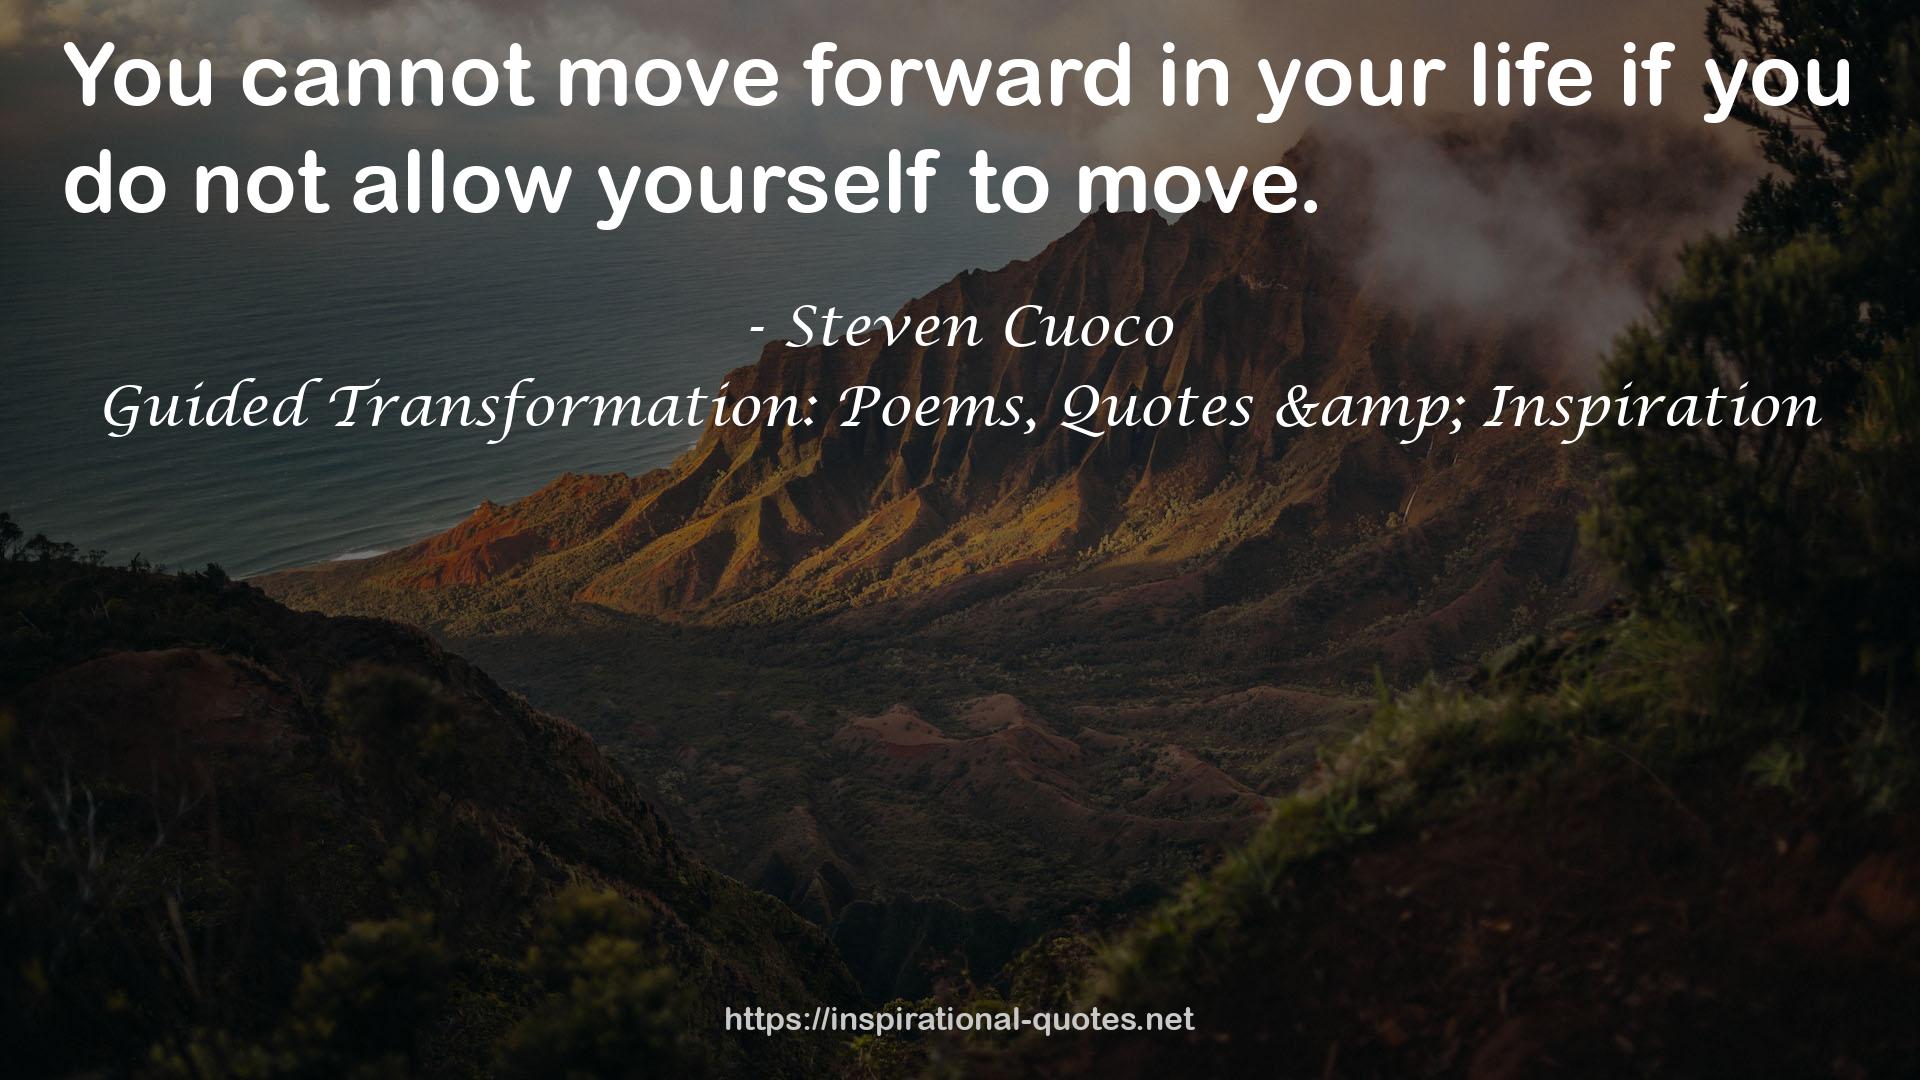 Guided Transformation: Poems, Quotes & Inspiration QUOTES